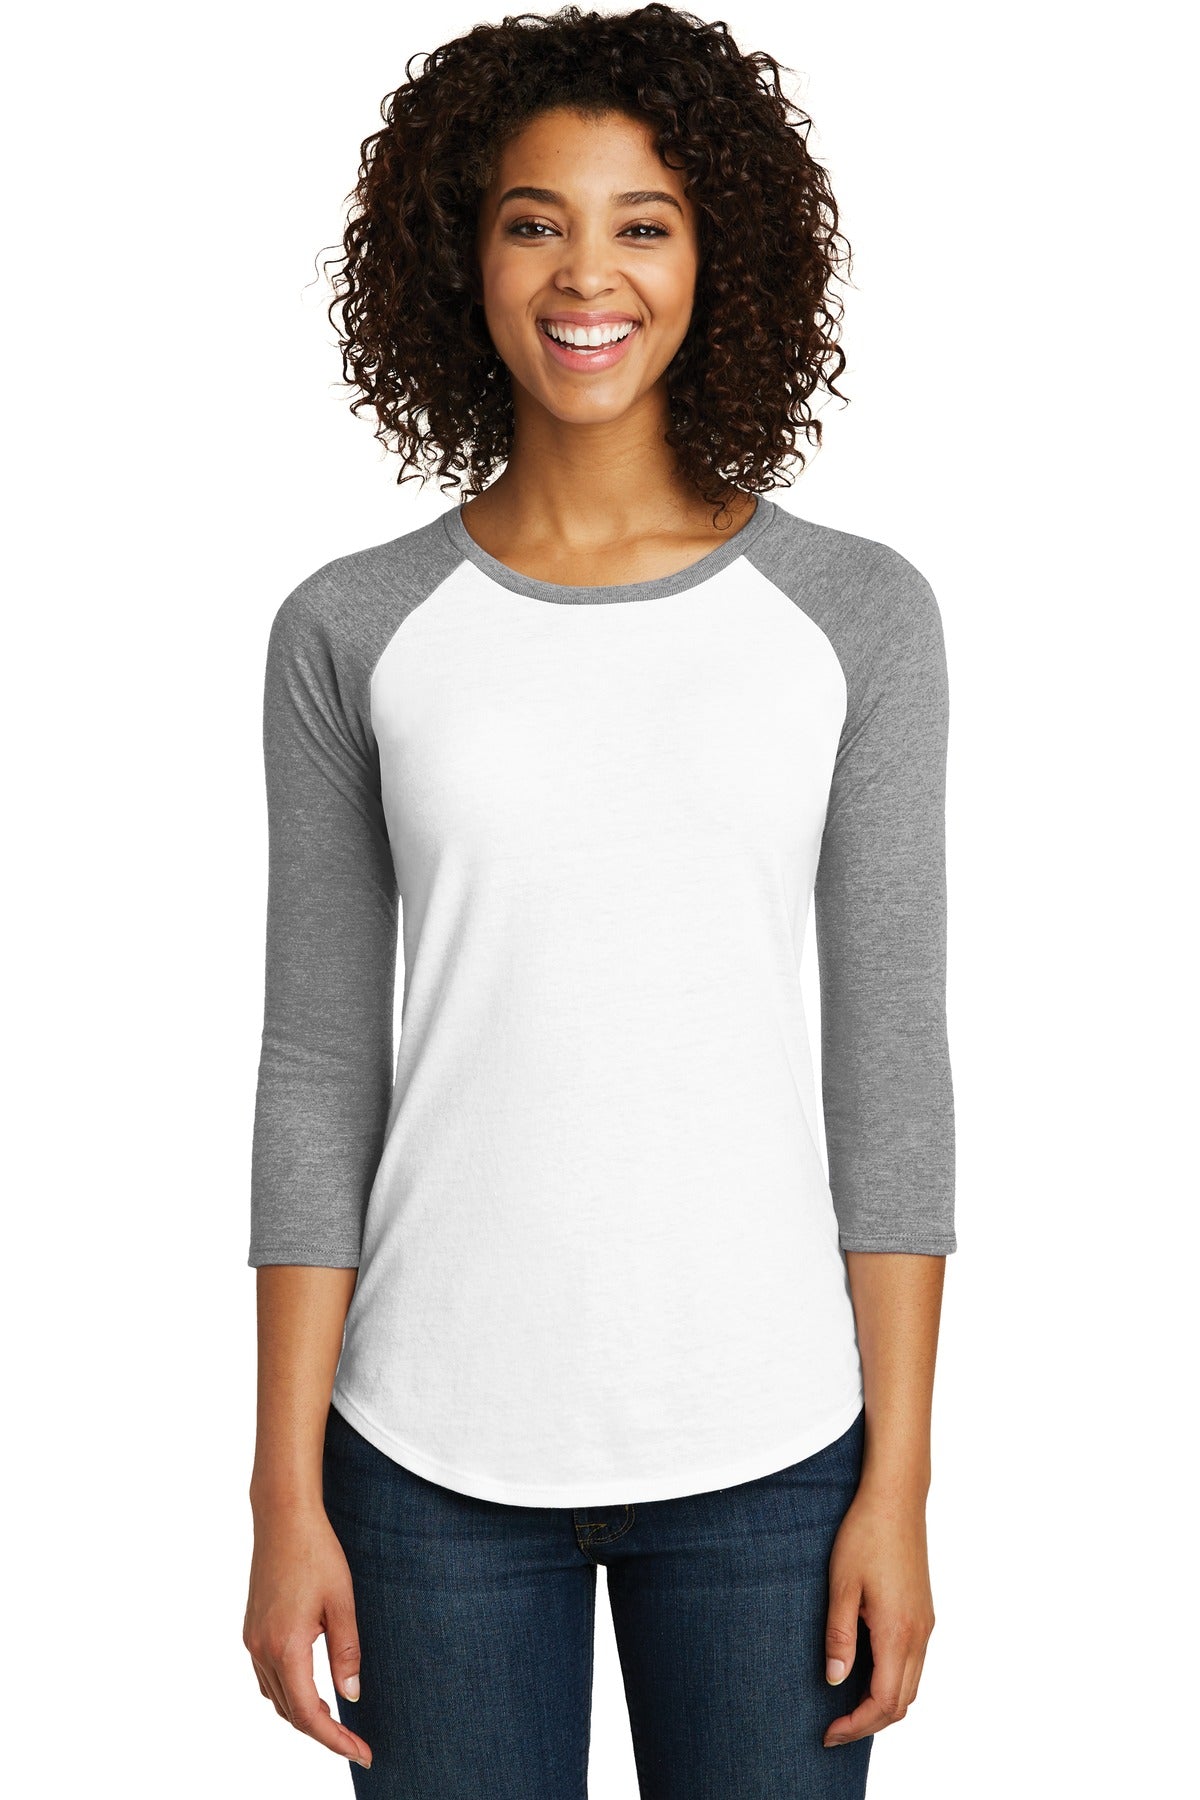 District® Women&#39;s Fitted Very Important Tee® 3/4-Sleeve Raglan. DT6211